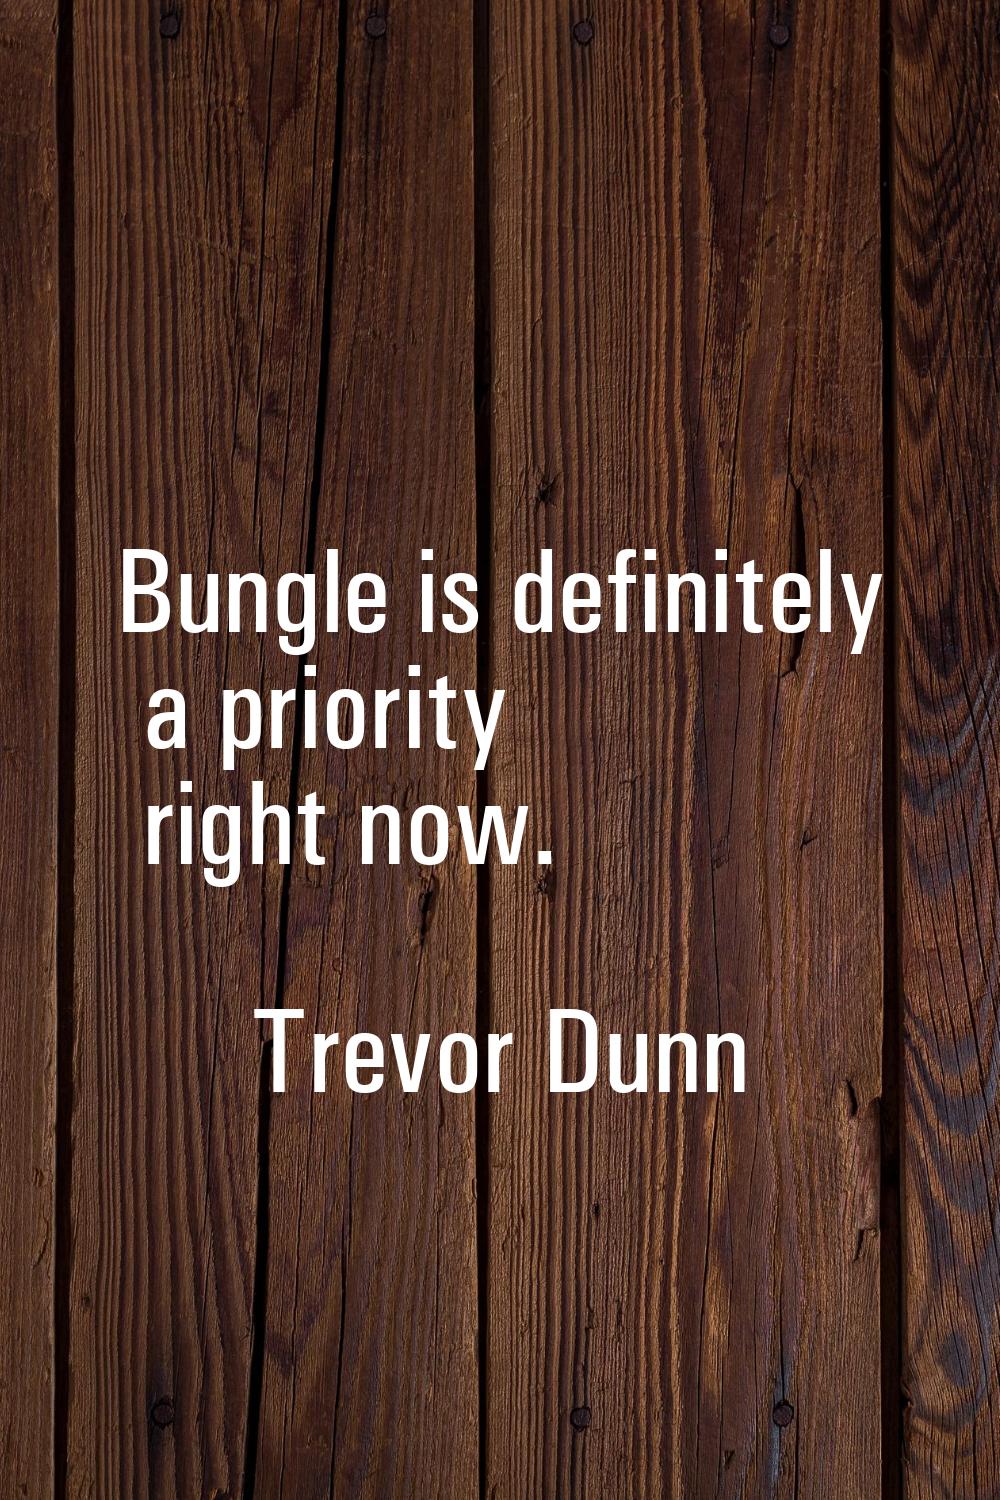 Bungle is definitely a priority right now.